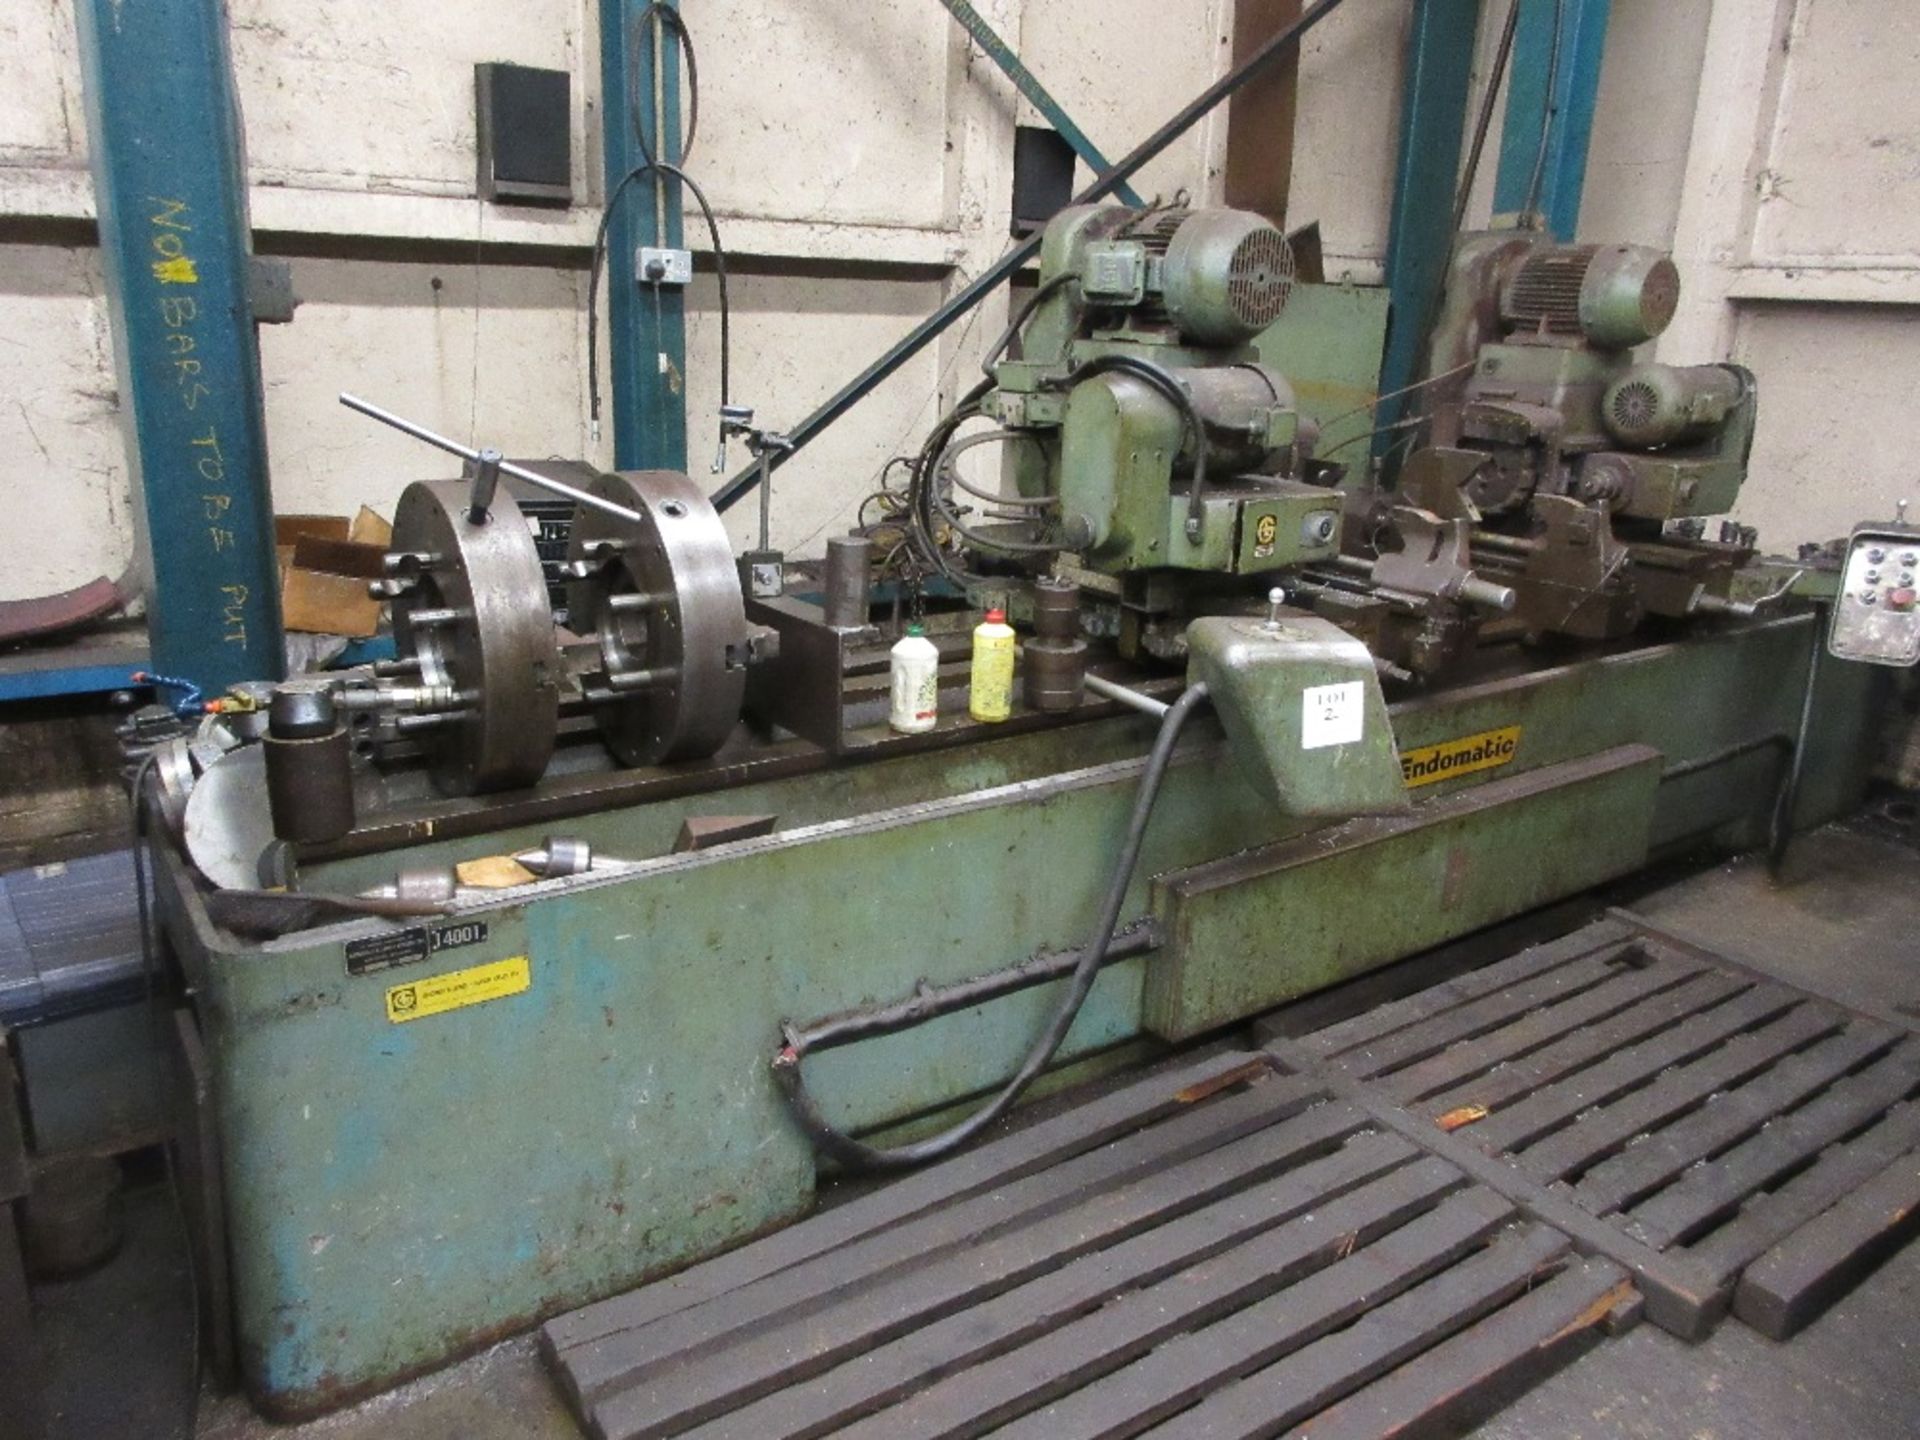 Giddings & Lewis Fraser Type MC Endomatic double ending and centering machine 3.3m approx. between